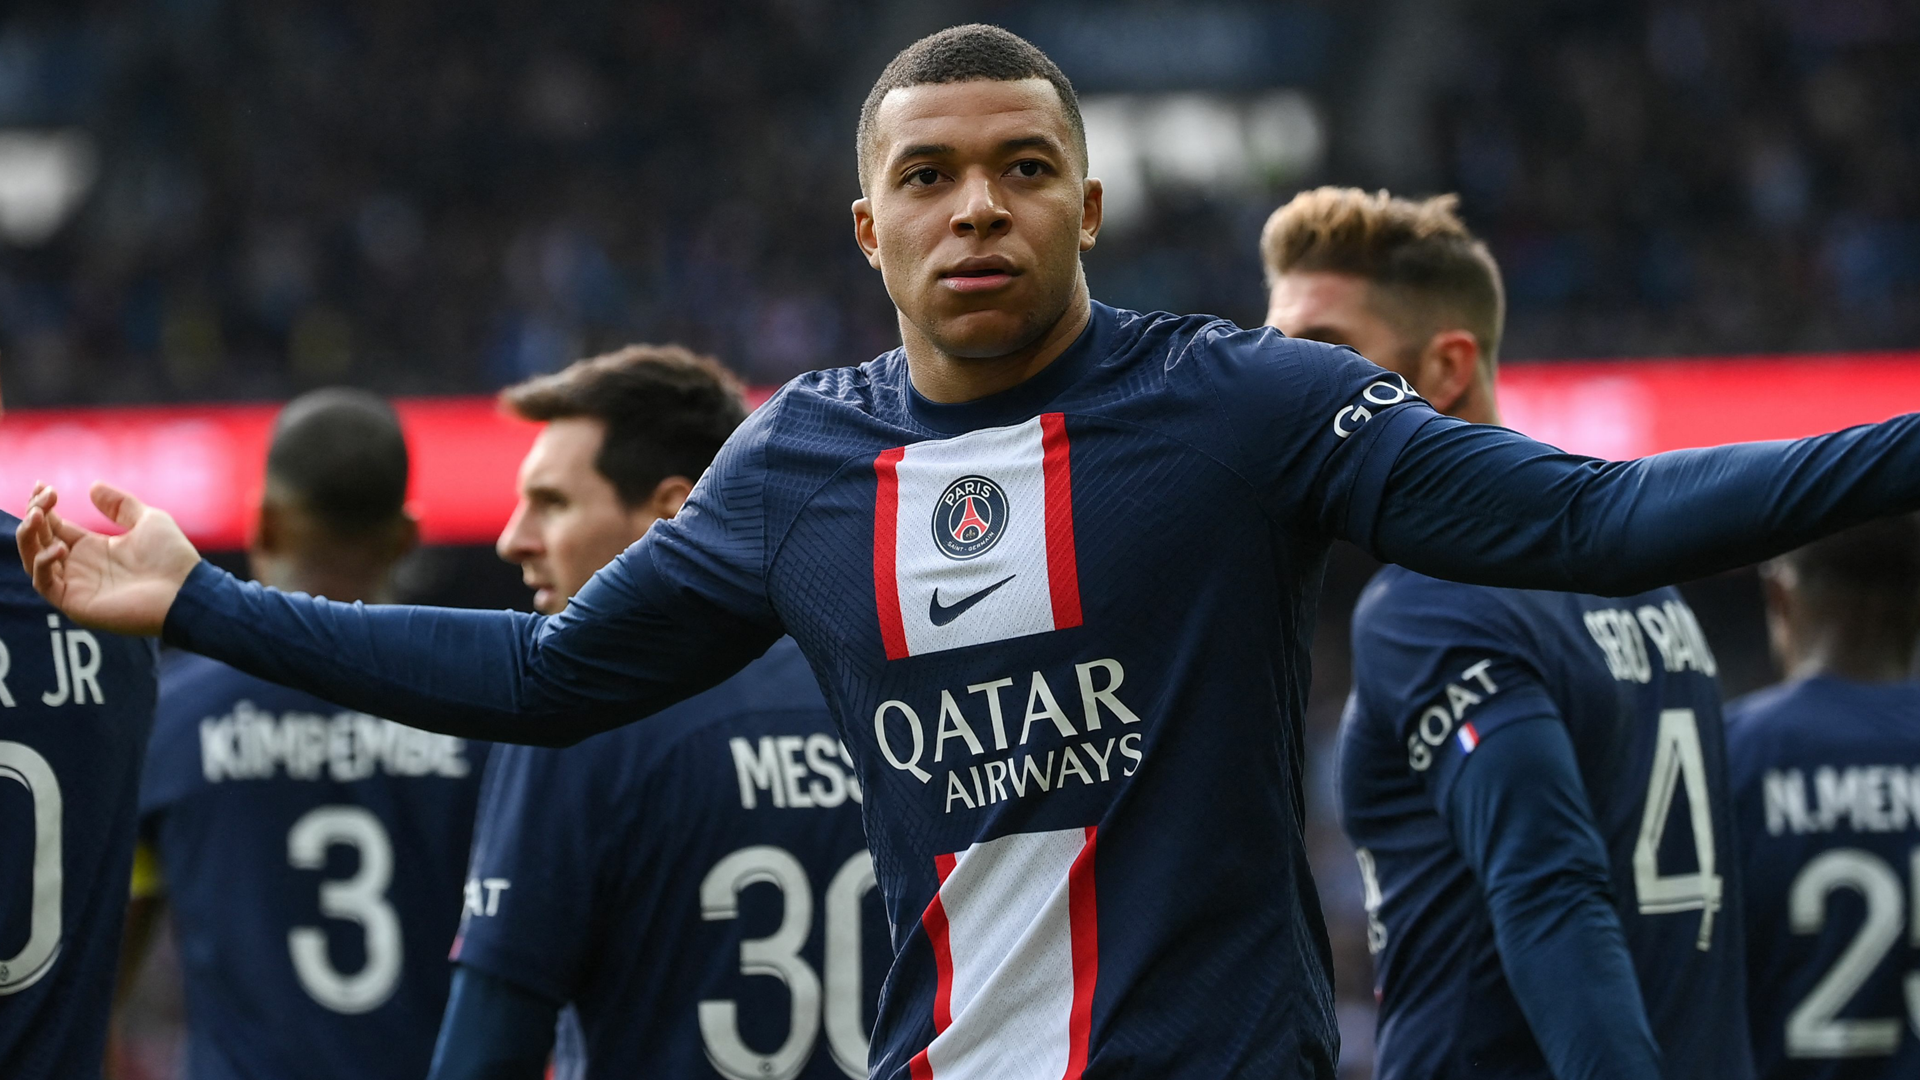 WATCH Pace, power and a nutmeg! Kylian Mbappe wriggles through two defenders to score stunning opening goal for PSG vs Lille Goal